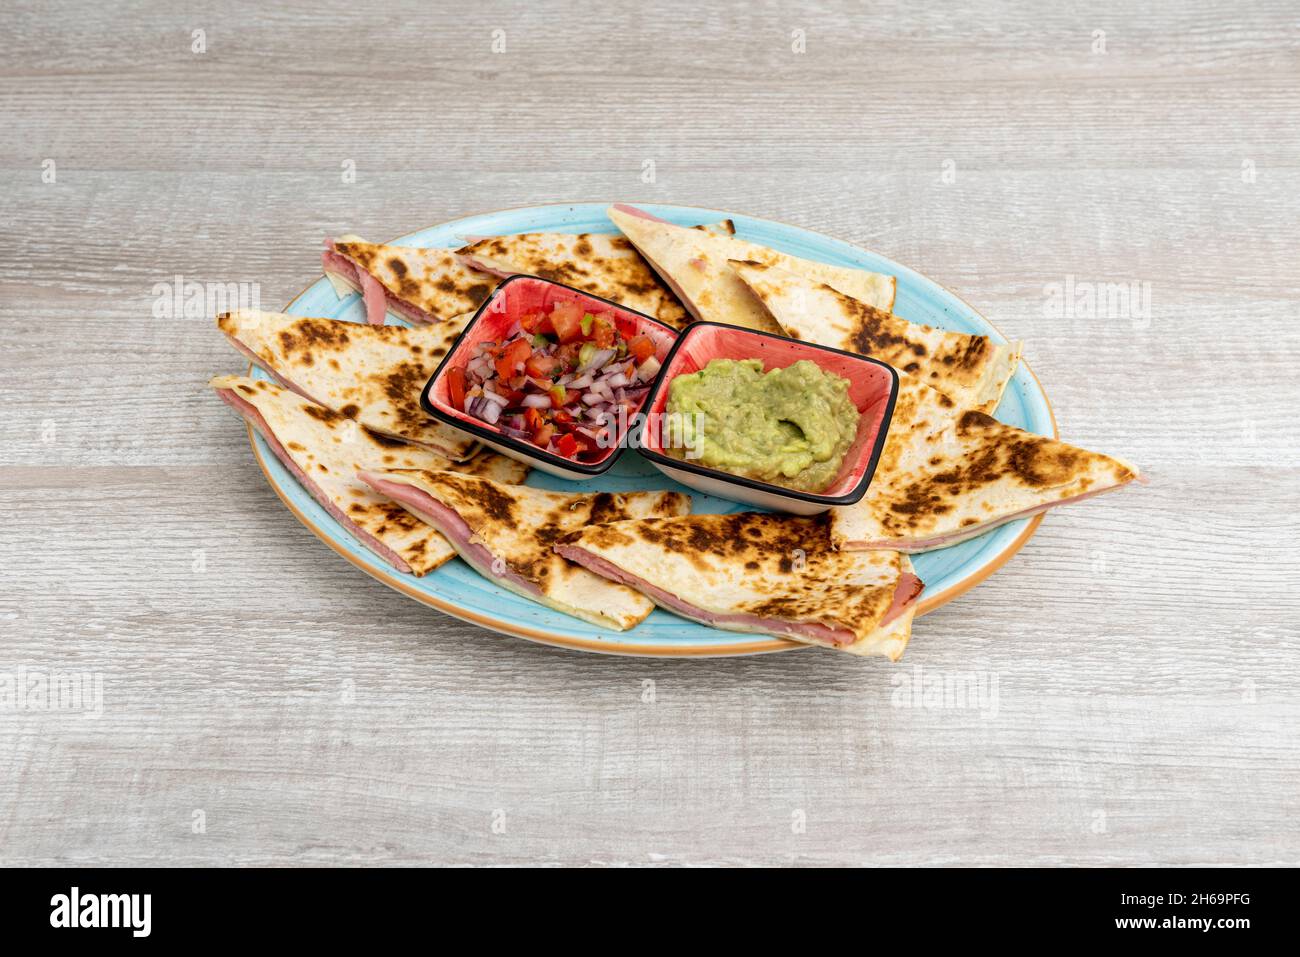 The quesadilla consists of a corn or wheat tortilla, folded in half that can be filled with cheese or other ingredients and eaten hot, either fried or Stock Photo